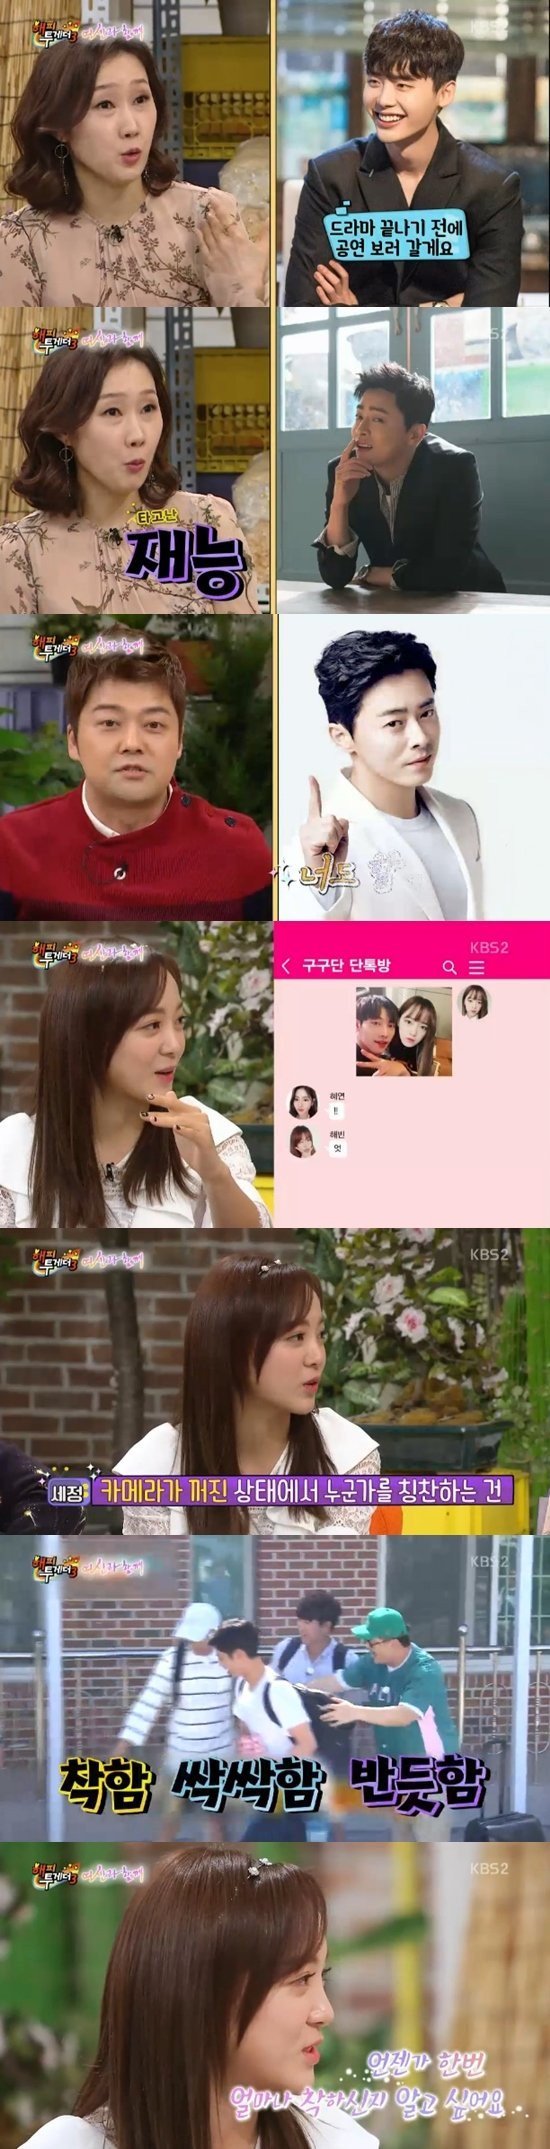 Kim Sejeong di \'Happy Together 3\'